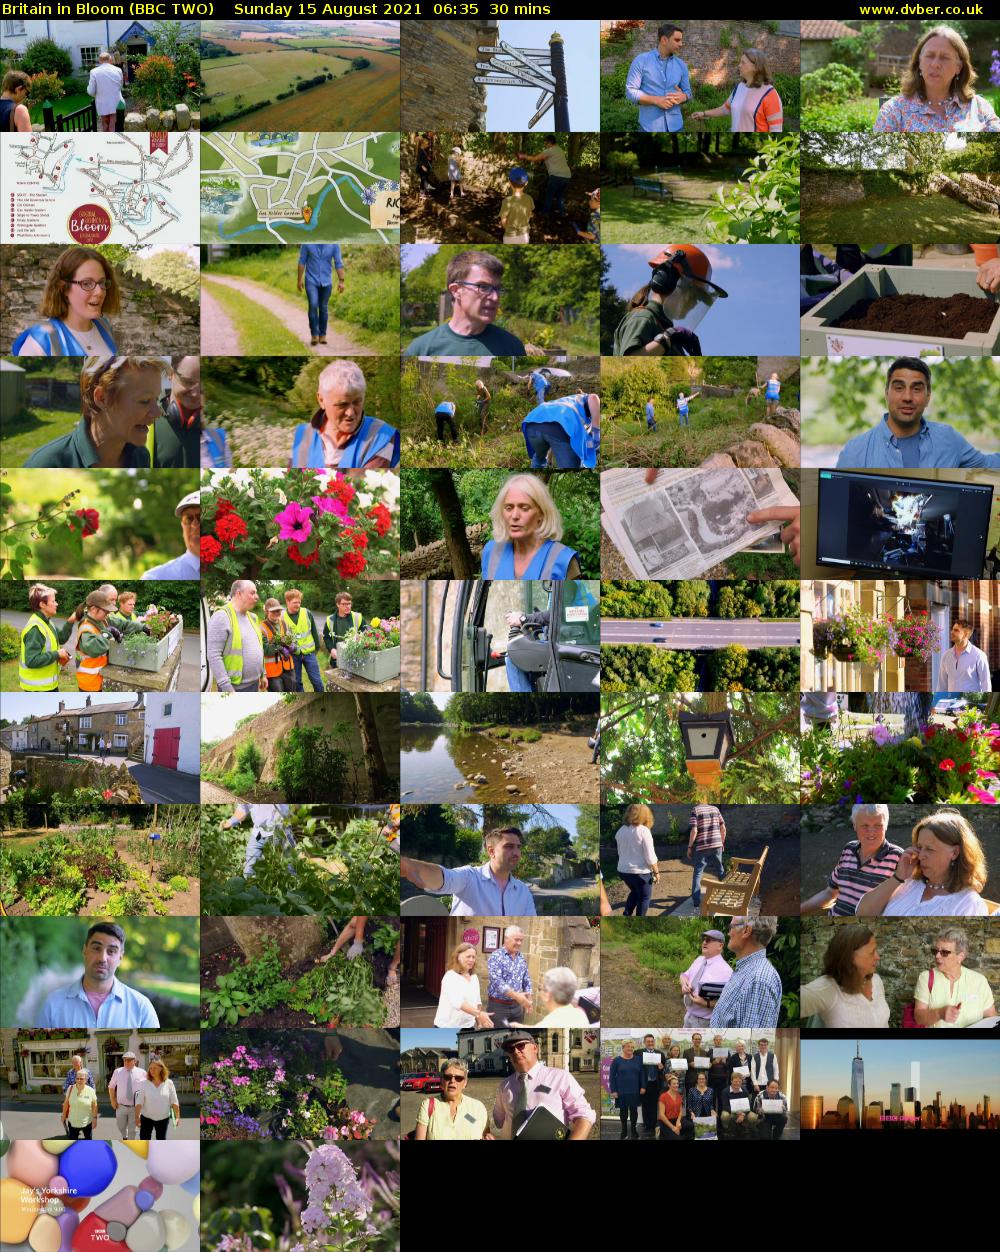 Britain in Bloom (BBC TWO) Sunday 15 August 2021 06:35 - 07:05